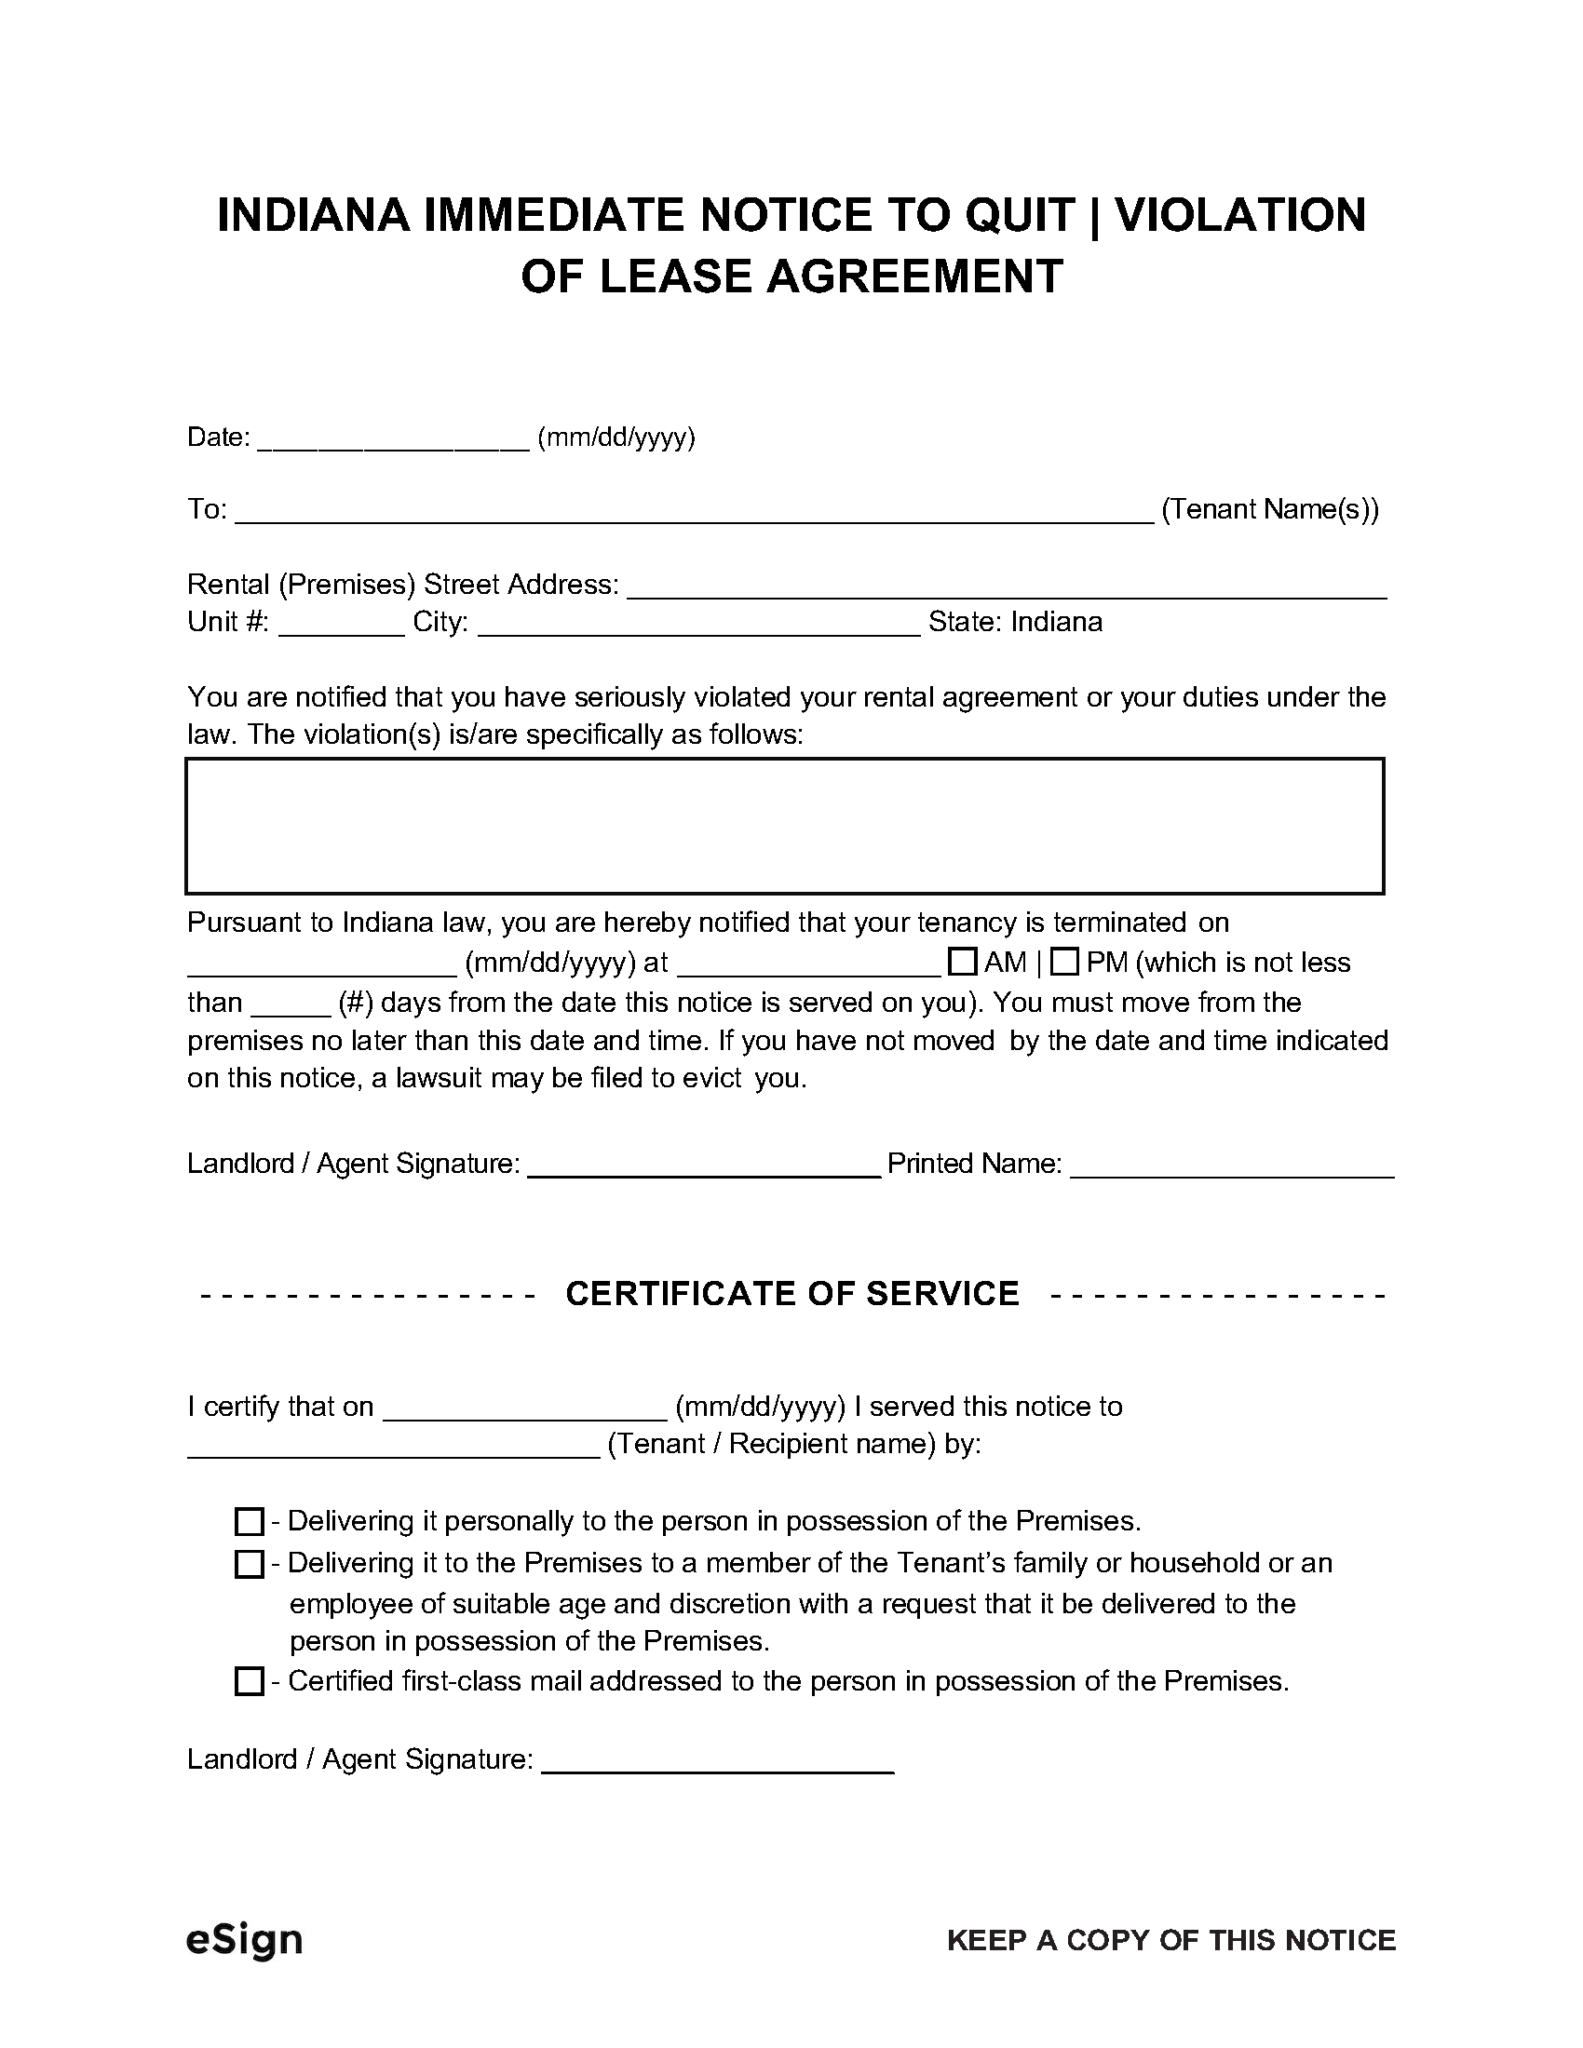 free-indiana-eviction-notice-templates-laws-pdf-word